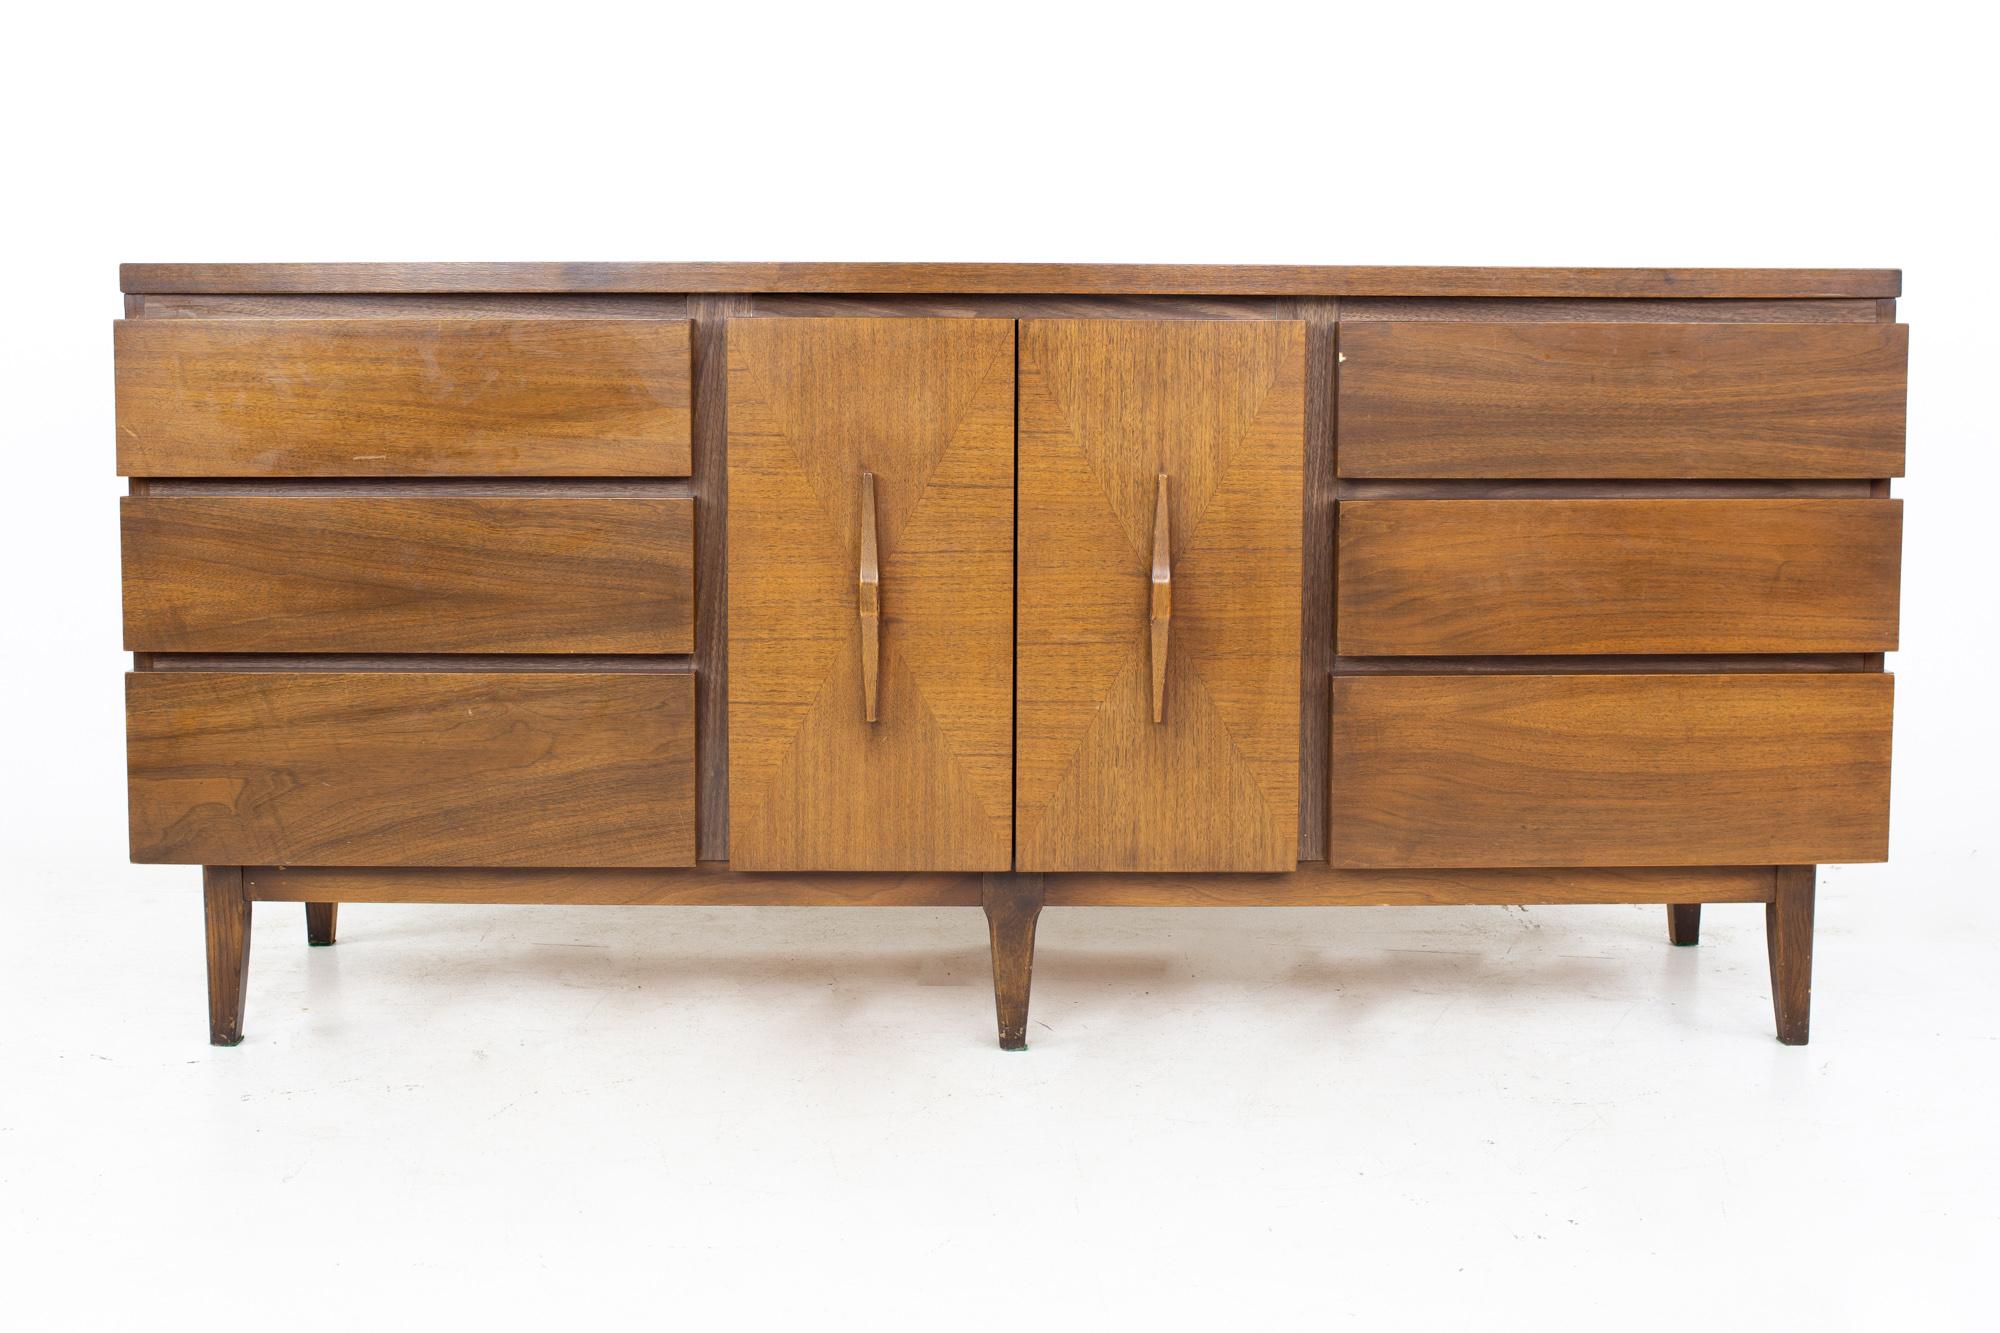 Mid century harlequin bow front inlaid walnut 9 drawer lowboy dresser
Dresser measures: 72 wide x 19.25 deep x 32 inches high

All pieces of furniture can be had in what we call restored vintage condition. That means the piece is restored upon